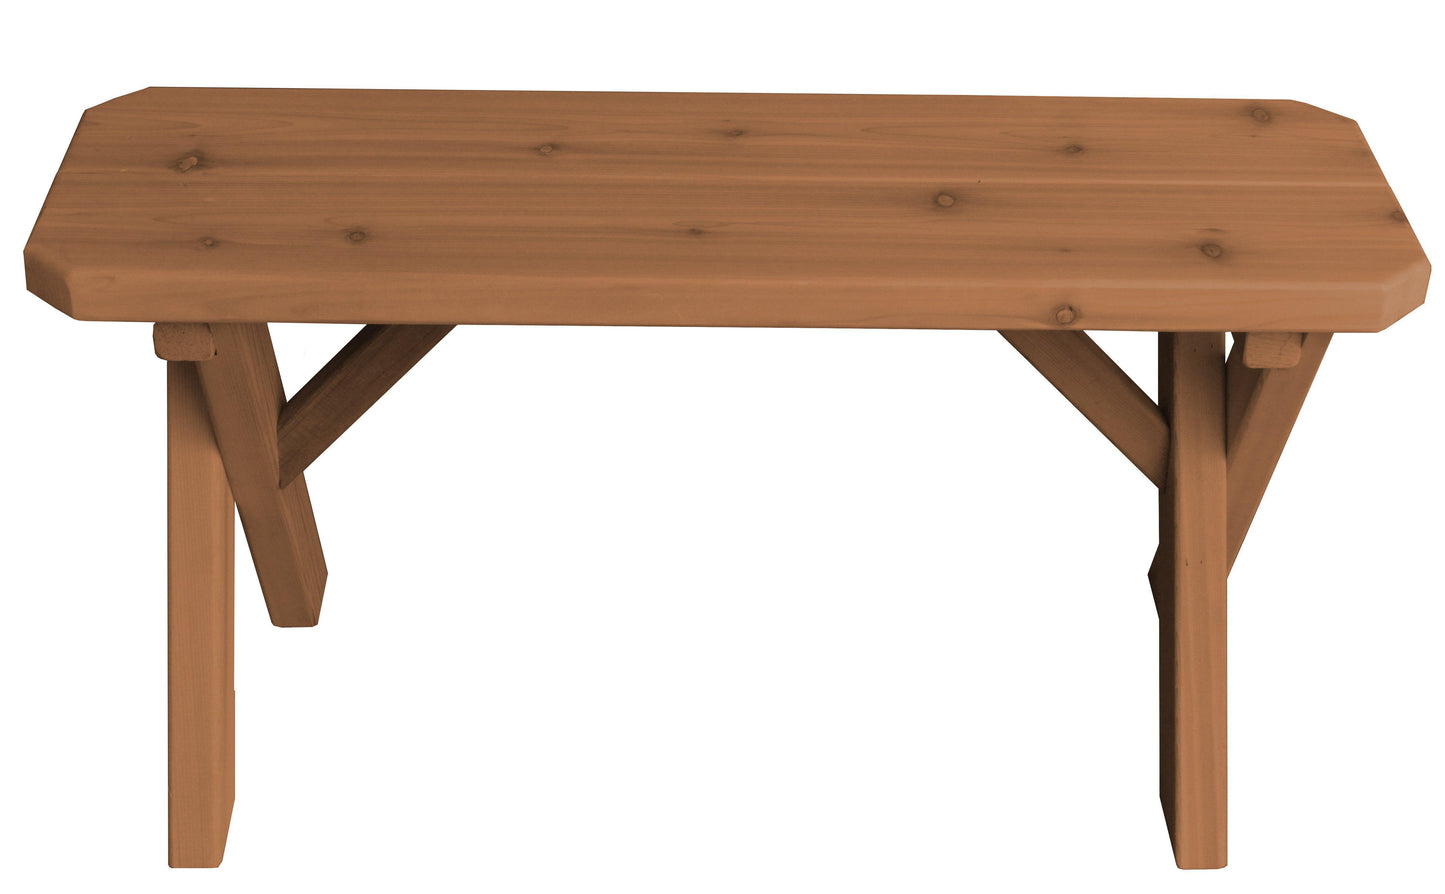 A&L FURNITURE CO. Western Red Cedar 23" Crossleg Bench Only - LEAD TIME TO SHIP 2 WEEKS